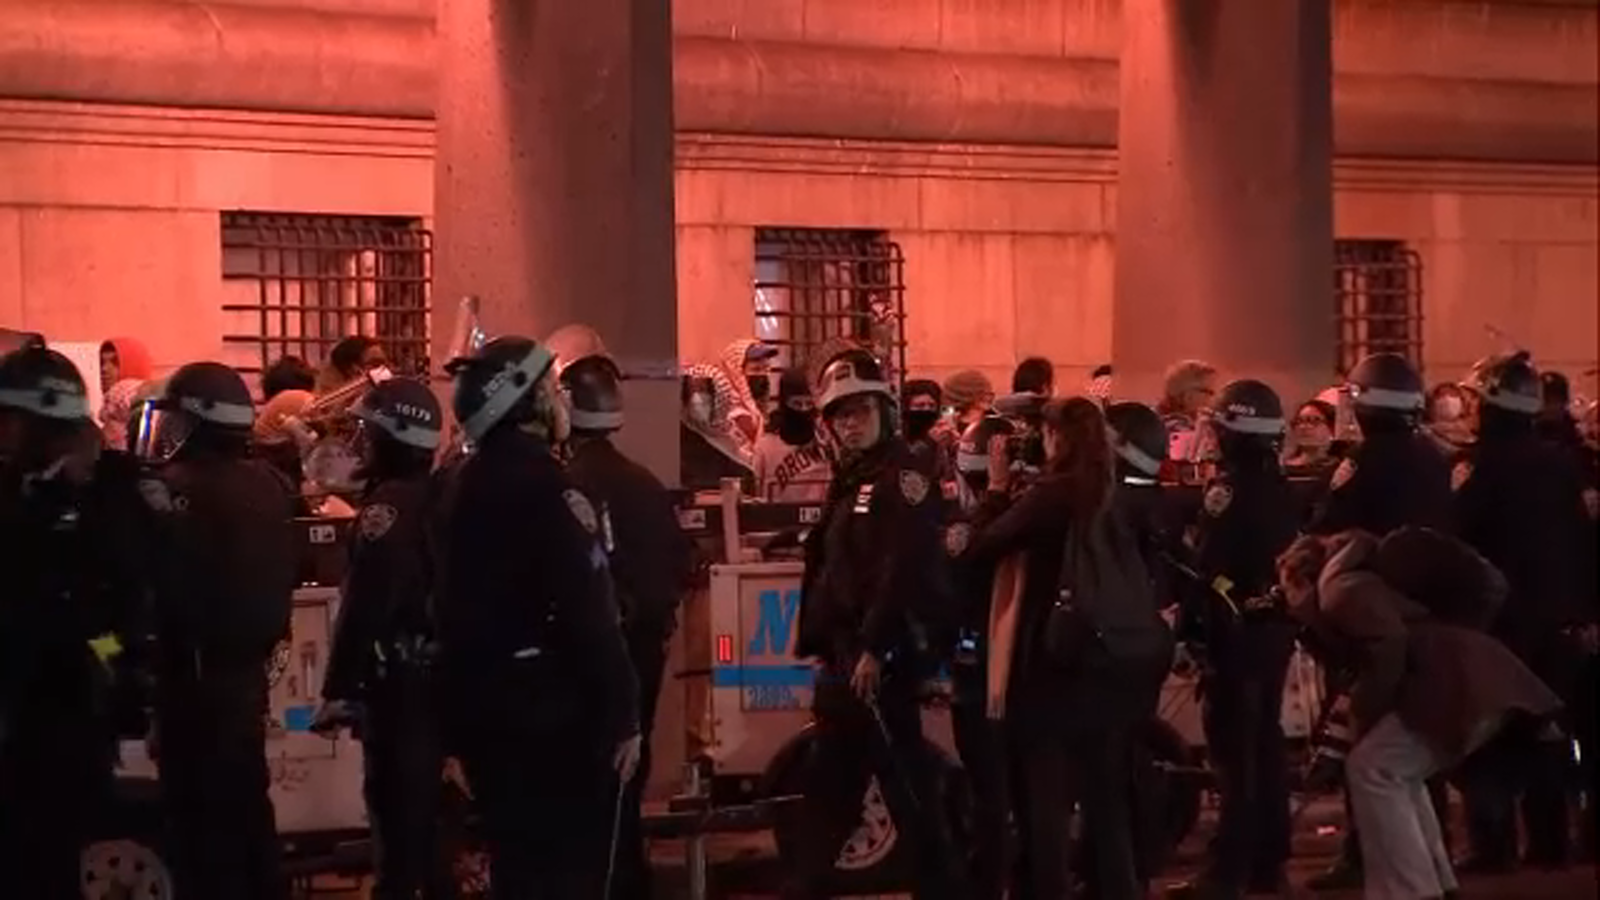 Protests at Columbia University: Dozens in custody after Hamilton Hall, encampment cleared, NYPD says [Video]